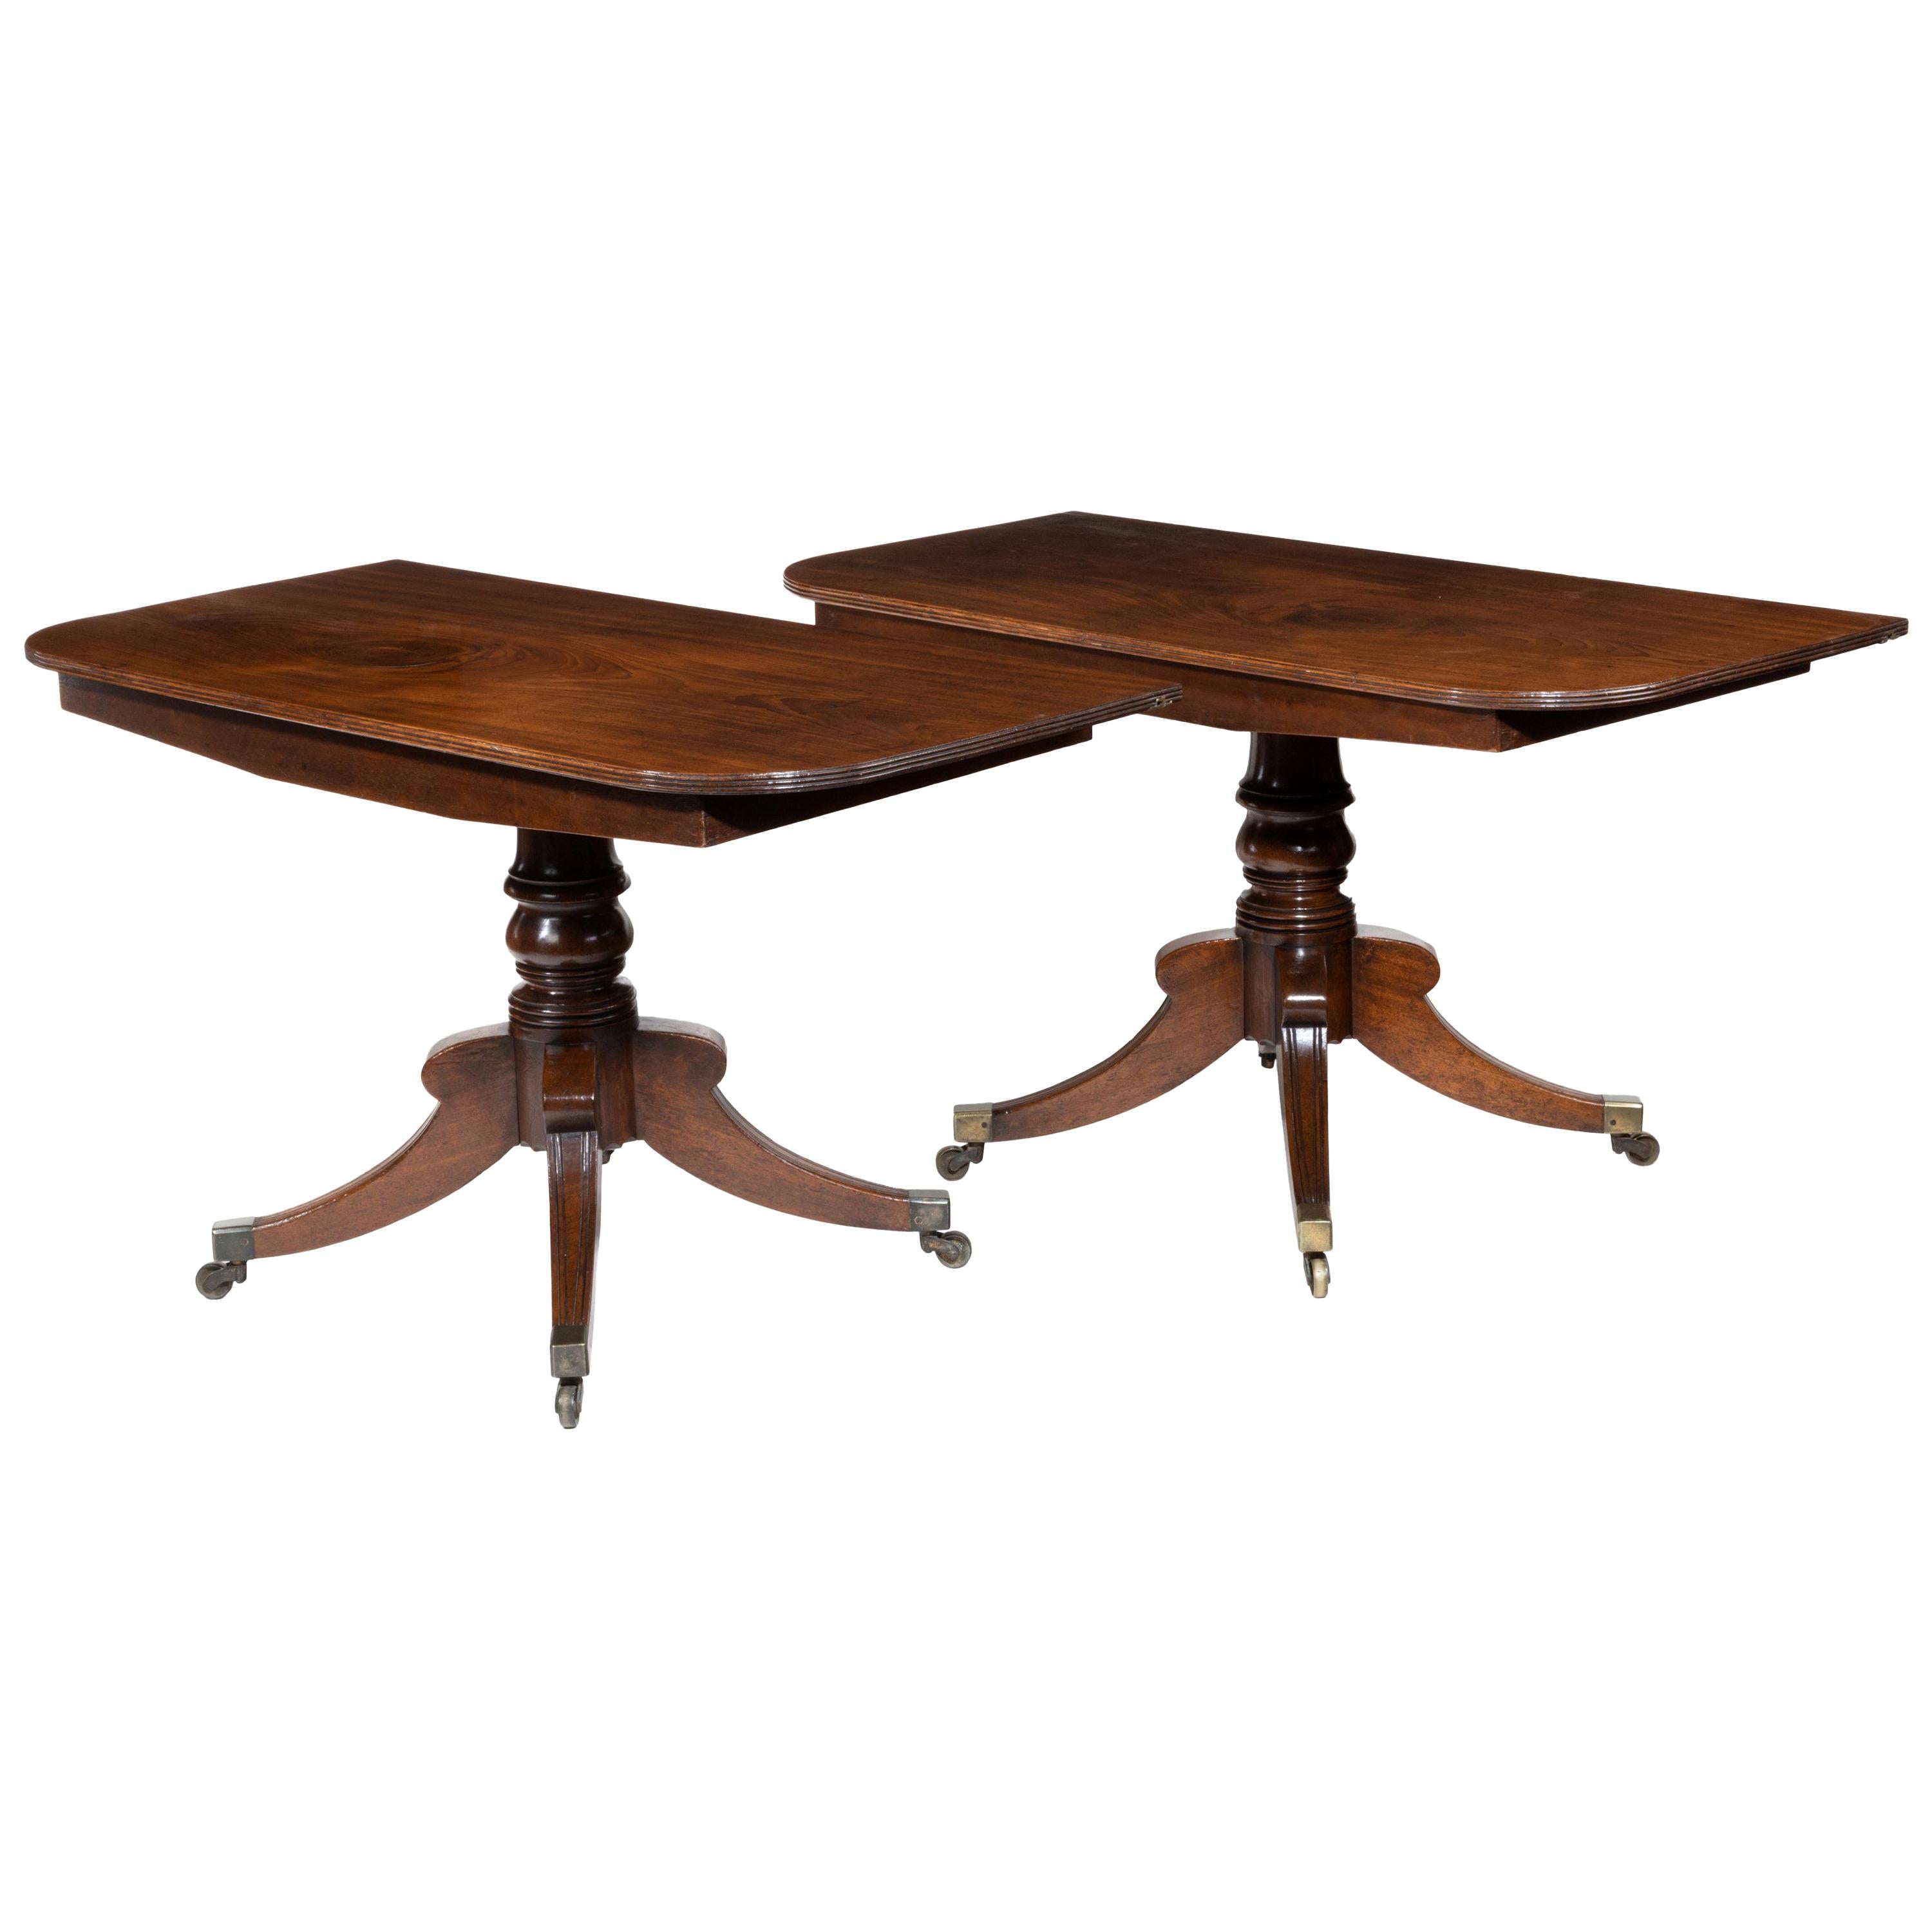 Pair of Mahogany Console Tables Which Convert into a Twin Pillar Dining Table